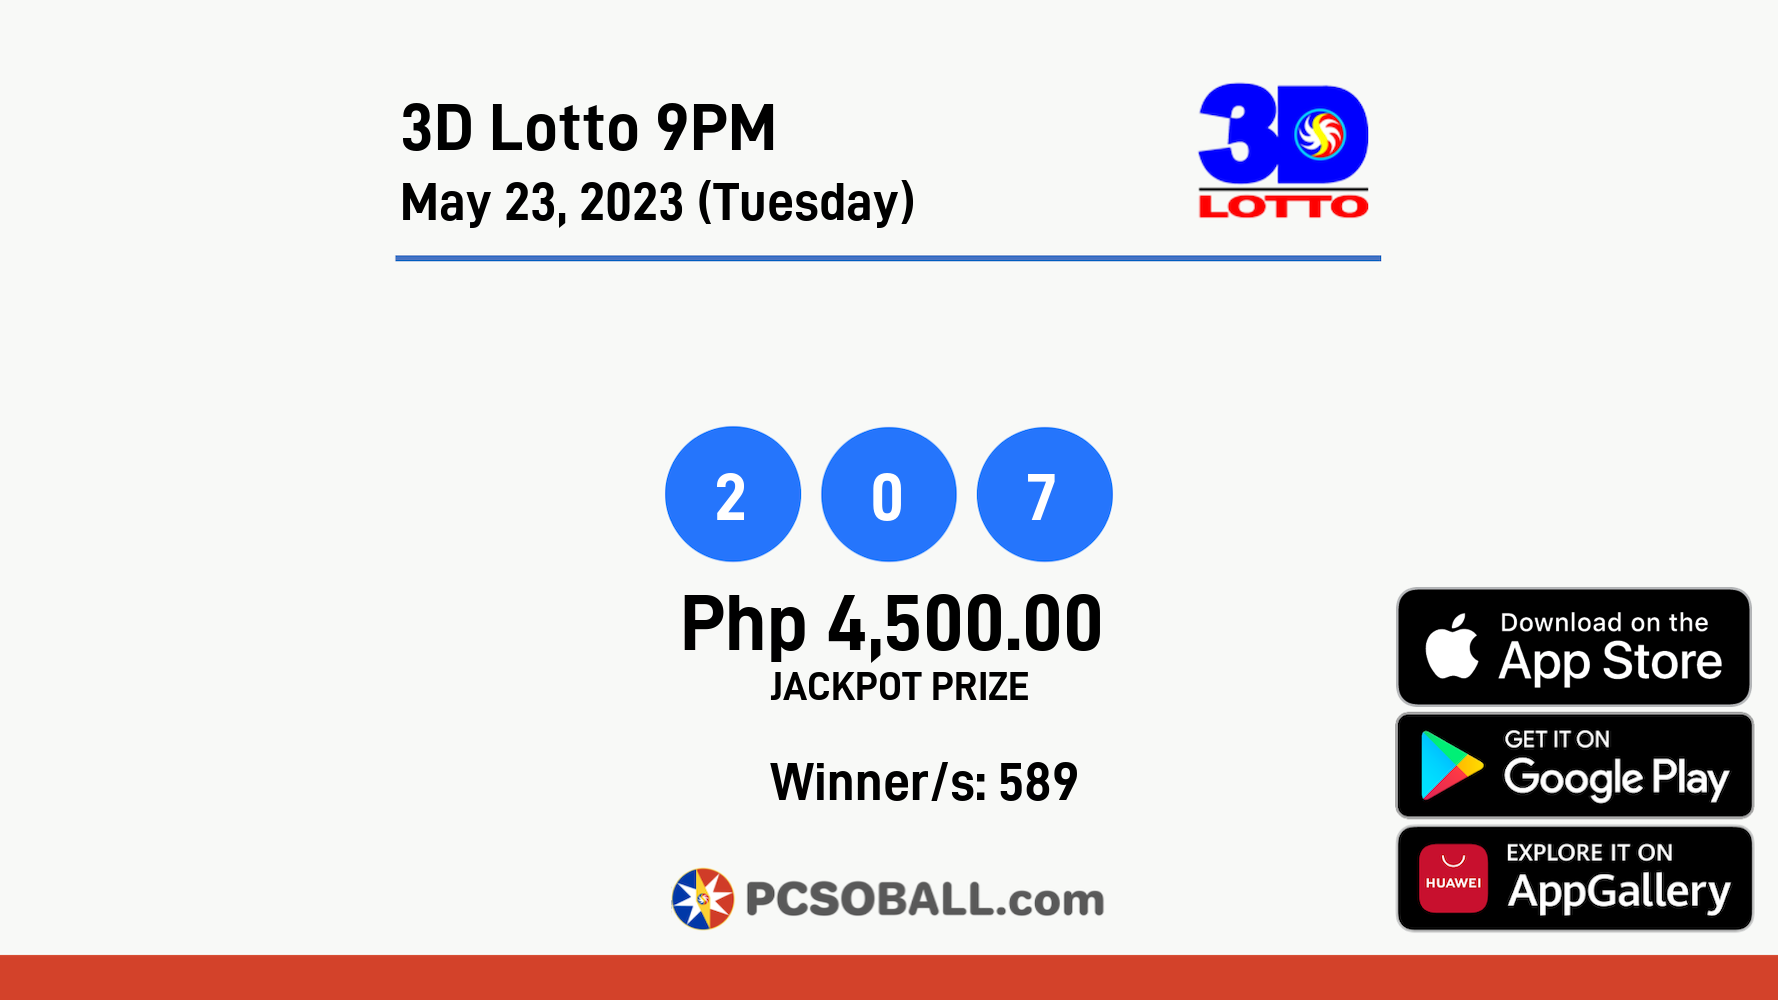 3D Lotto 9PM May 23, 2023 (Tuesday) Result